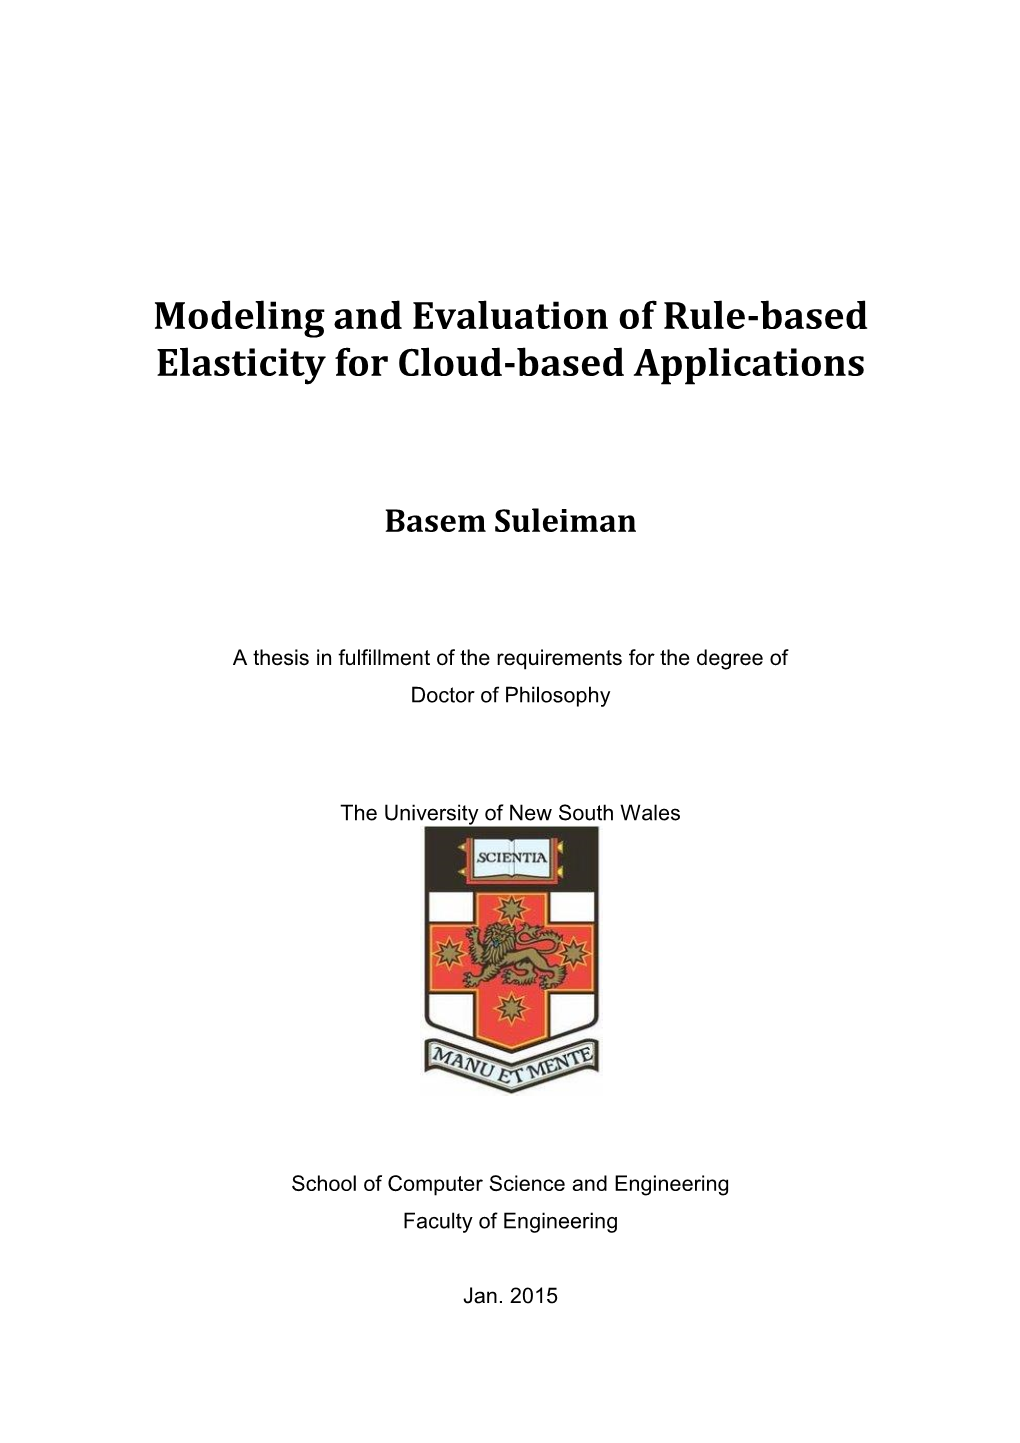 Modeling and Evaluation of Rule-Based Elasticity for Cloud-Based Applications